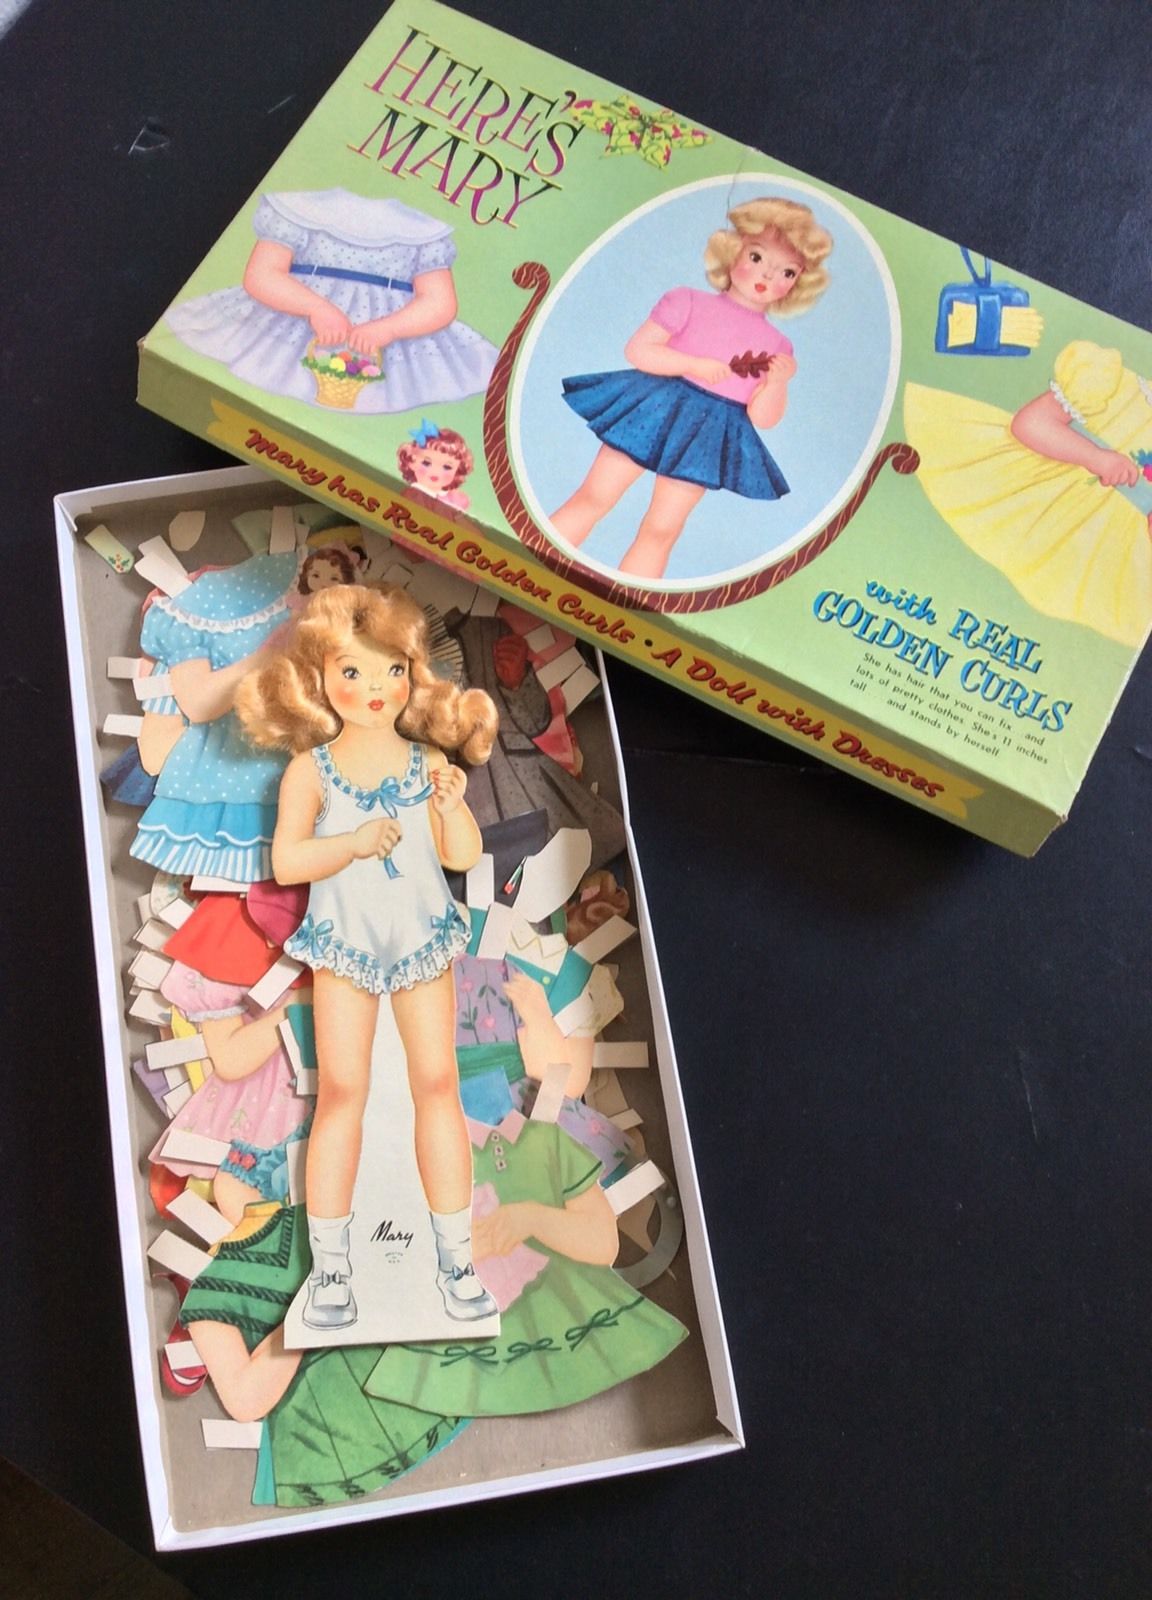 Original Here's Mary with Real Golden Curls Box Set Paper Dolls, 1956